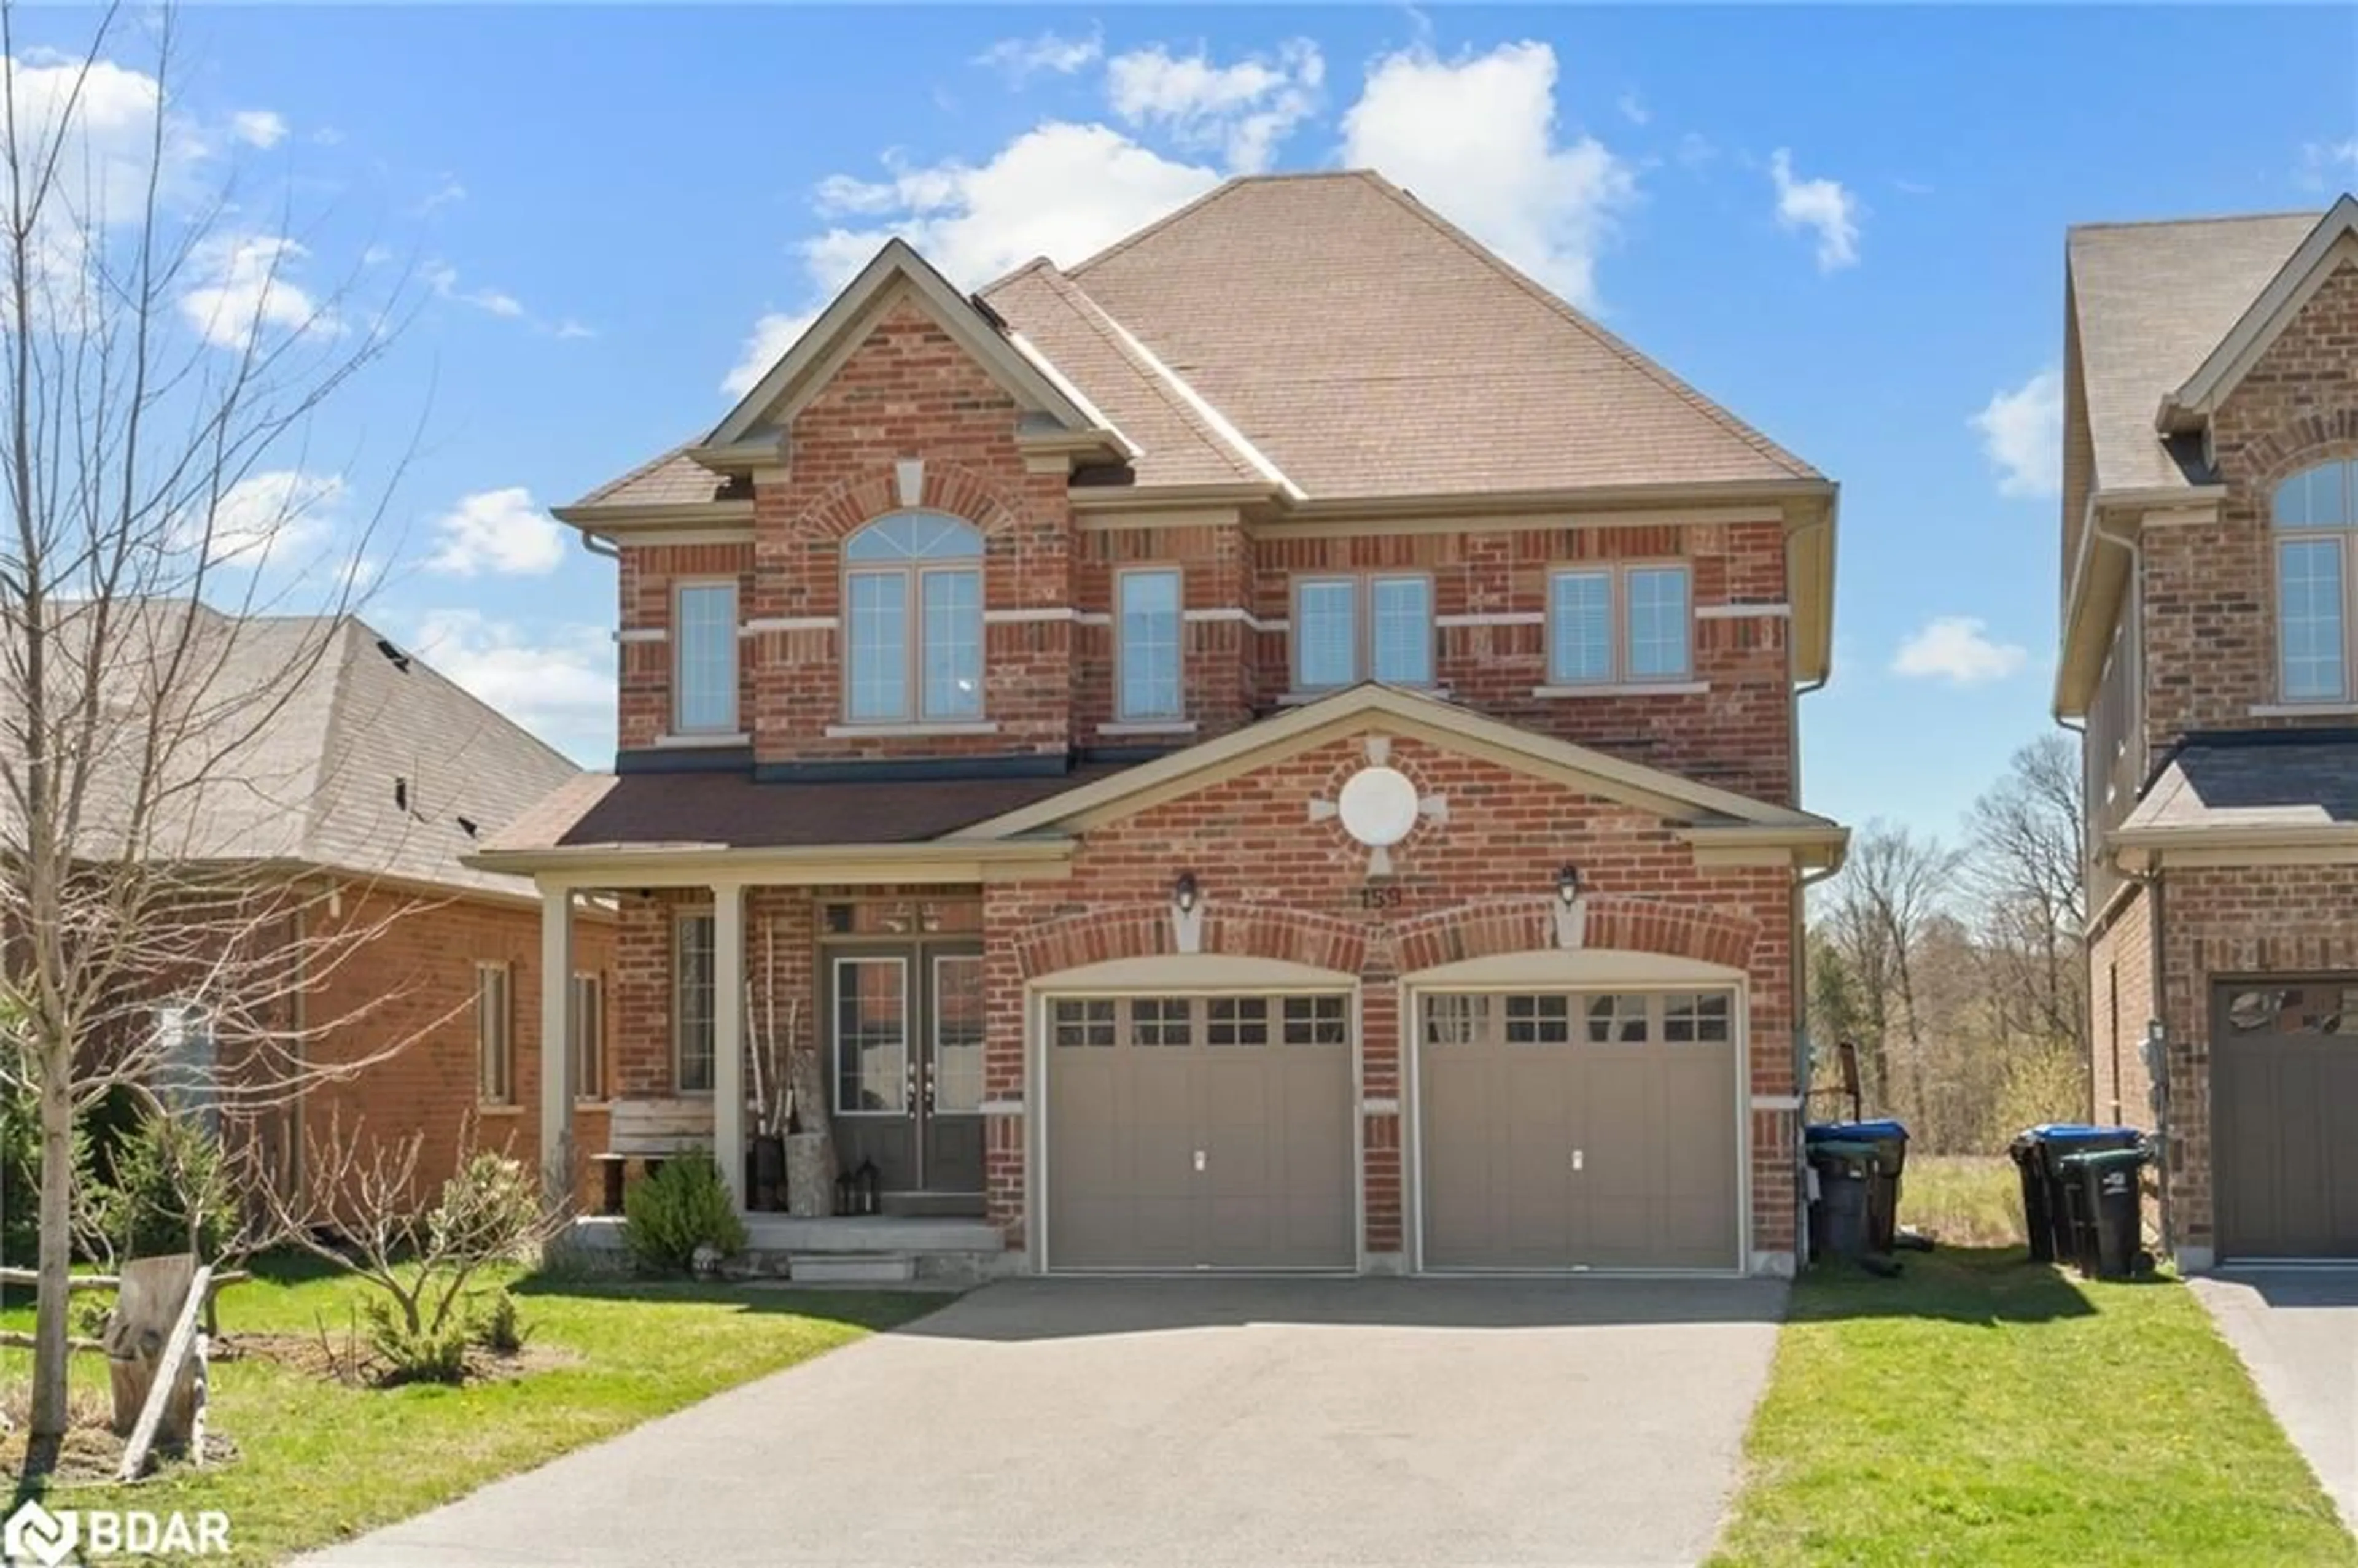 Home with brick exterior material for 159 Gold Park Gate, Angus Ontario L0M 1B4